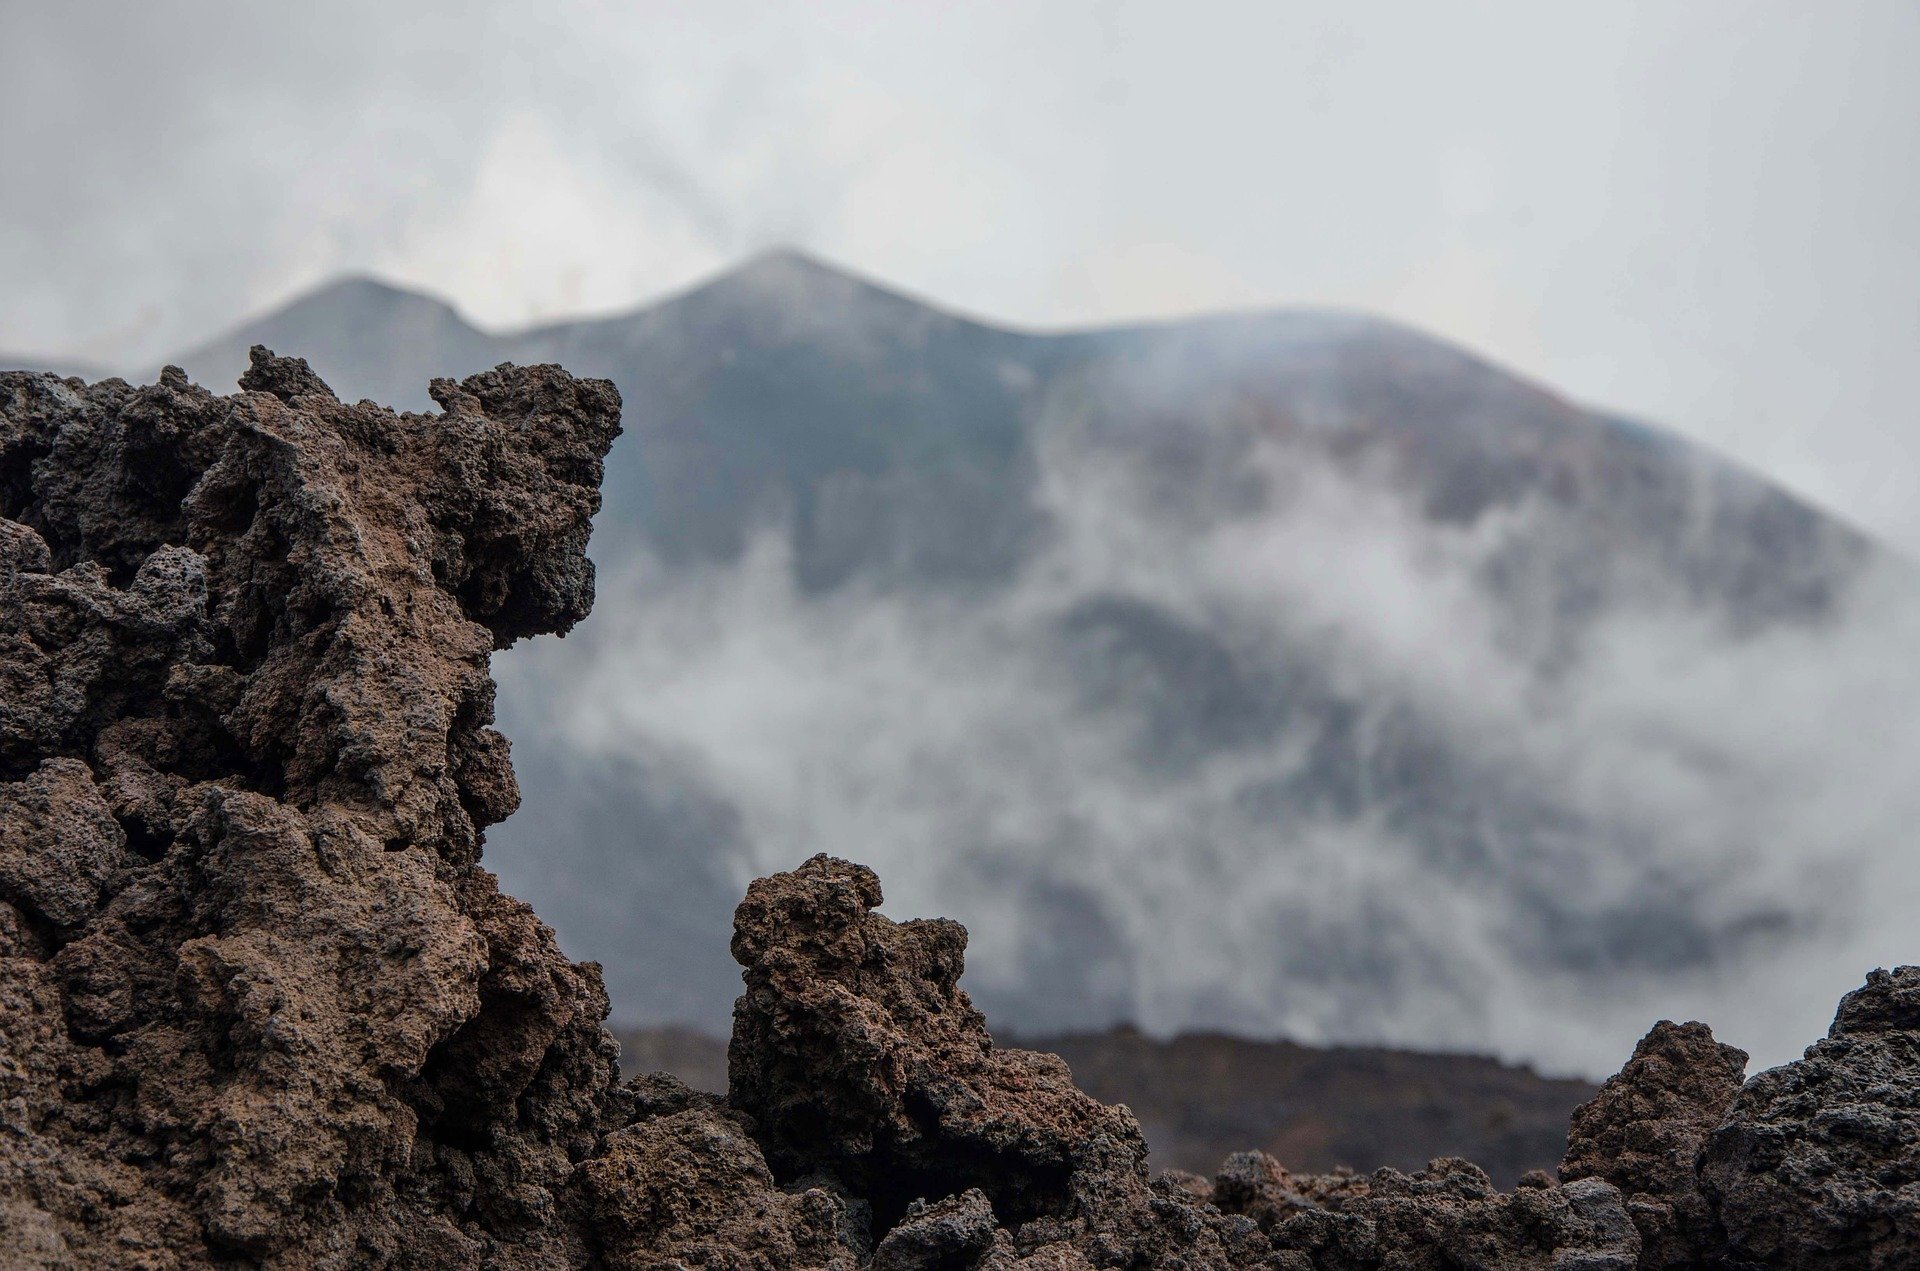 Carbon emissions from volcanic rocks can create global warming: study - Phys.org